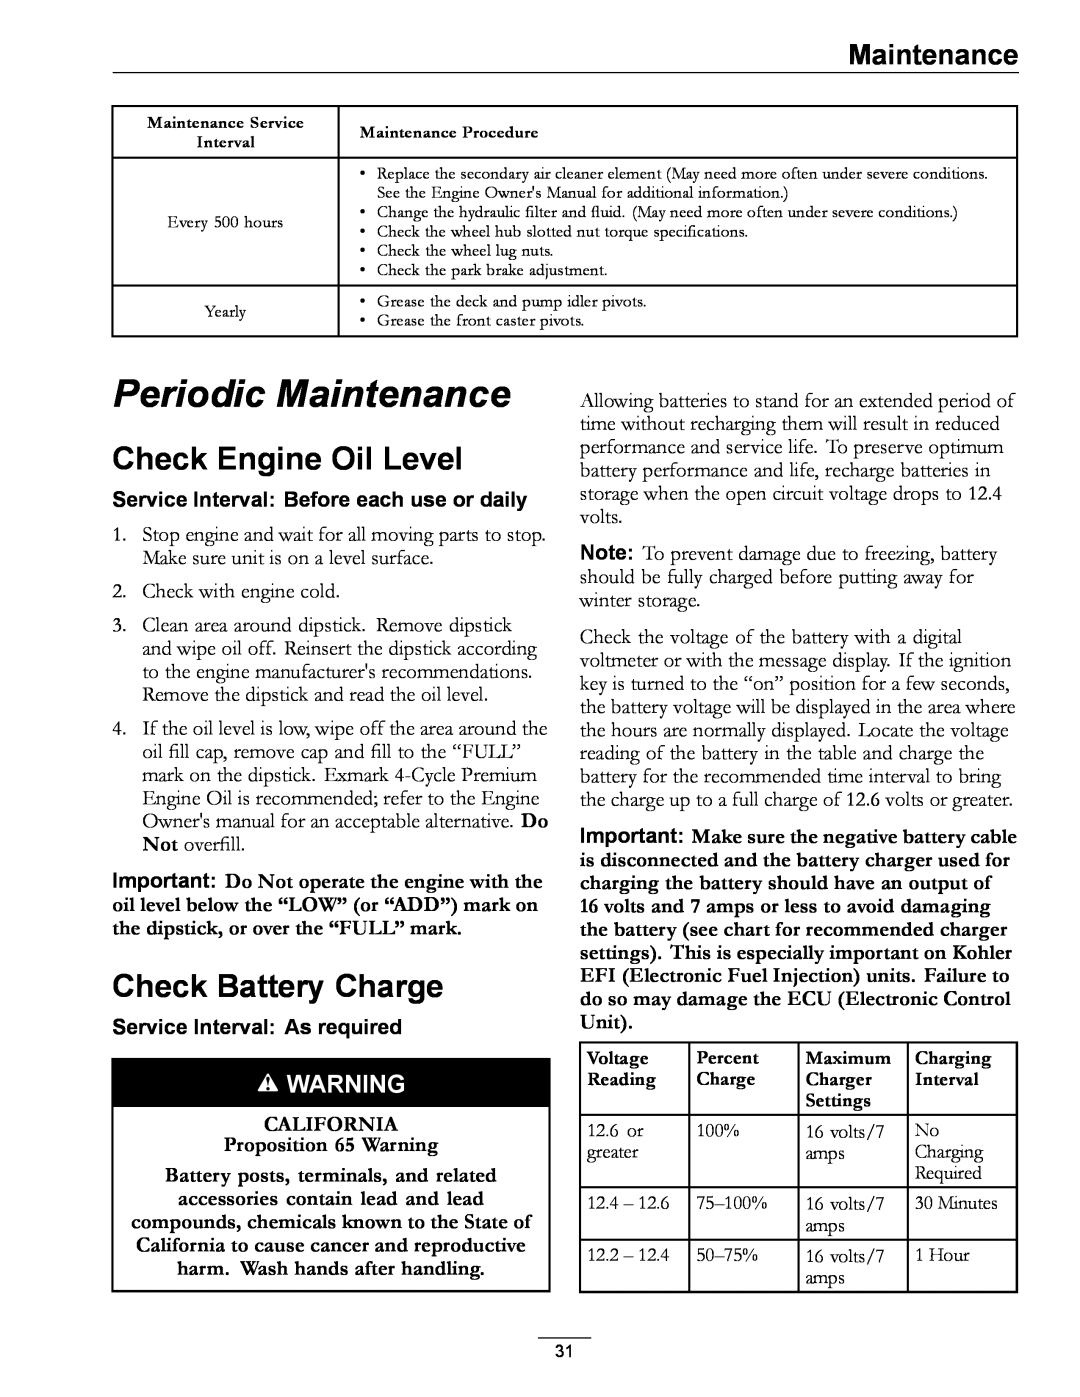 Exmark 312 Periodic Maintenance, Check Engine Oil Level, Check Battery Charge, Service Interval: Before each use or daily 